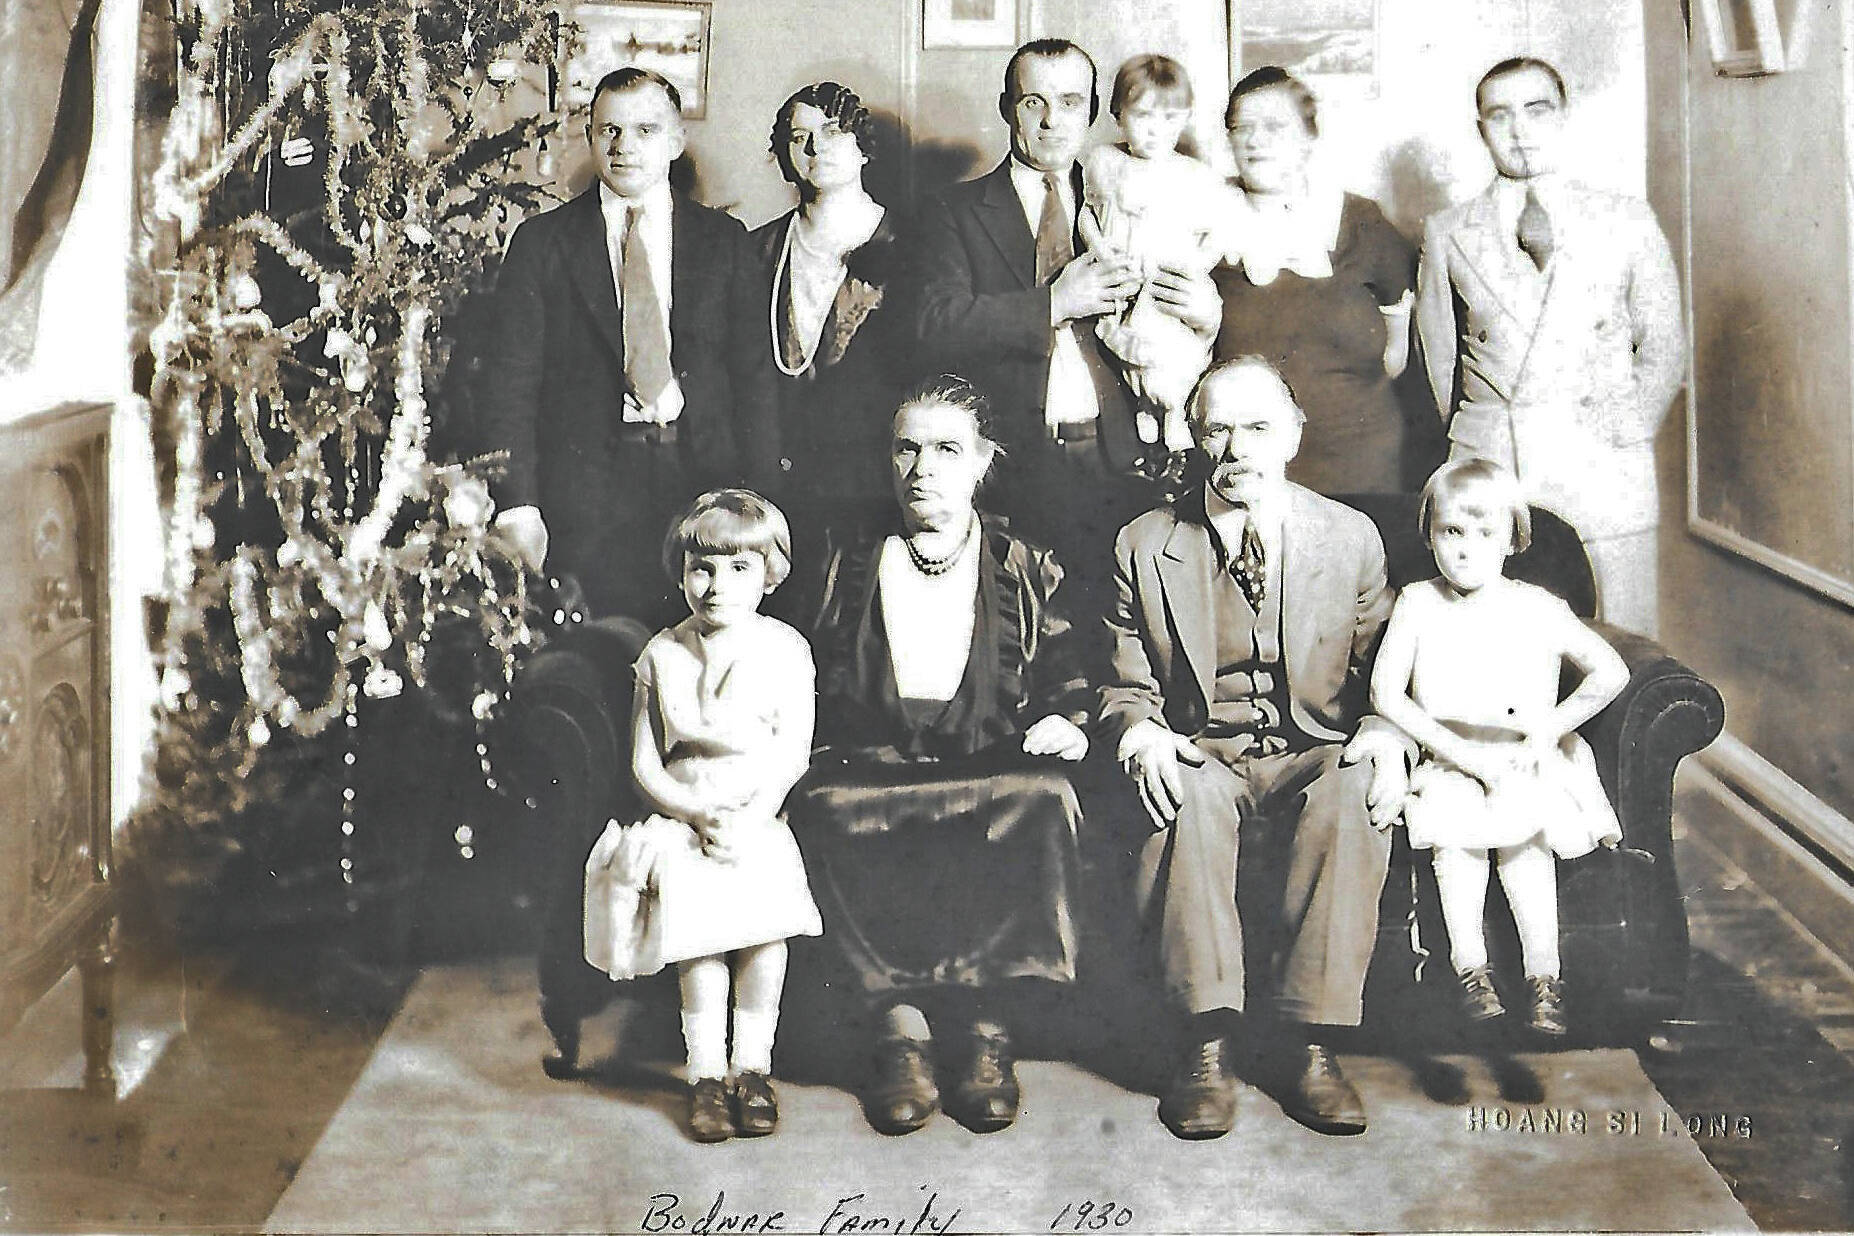 Peter and Pearl Bodnar (front, center) pose for a 1930 Christmas portrait with much of their family, probably in Manitoba, Canada. Pictured are: (back row, L-R) Alex, sister Anna (Bodnar) Bandura, brother Michael holding daughter Pearl next to his wife Jessie, and Marcus. In the front row are: Michael’s eldest daughter Olga, parents Parascevies “Pearl” and Peter Bodnar, and Michael’s middle daughter Marion. (Photo courtesy of the Bodnar Family Collection)